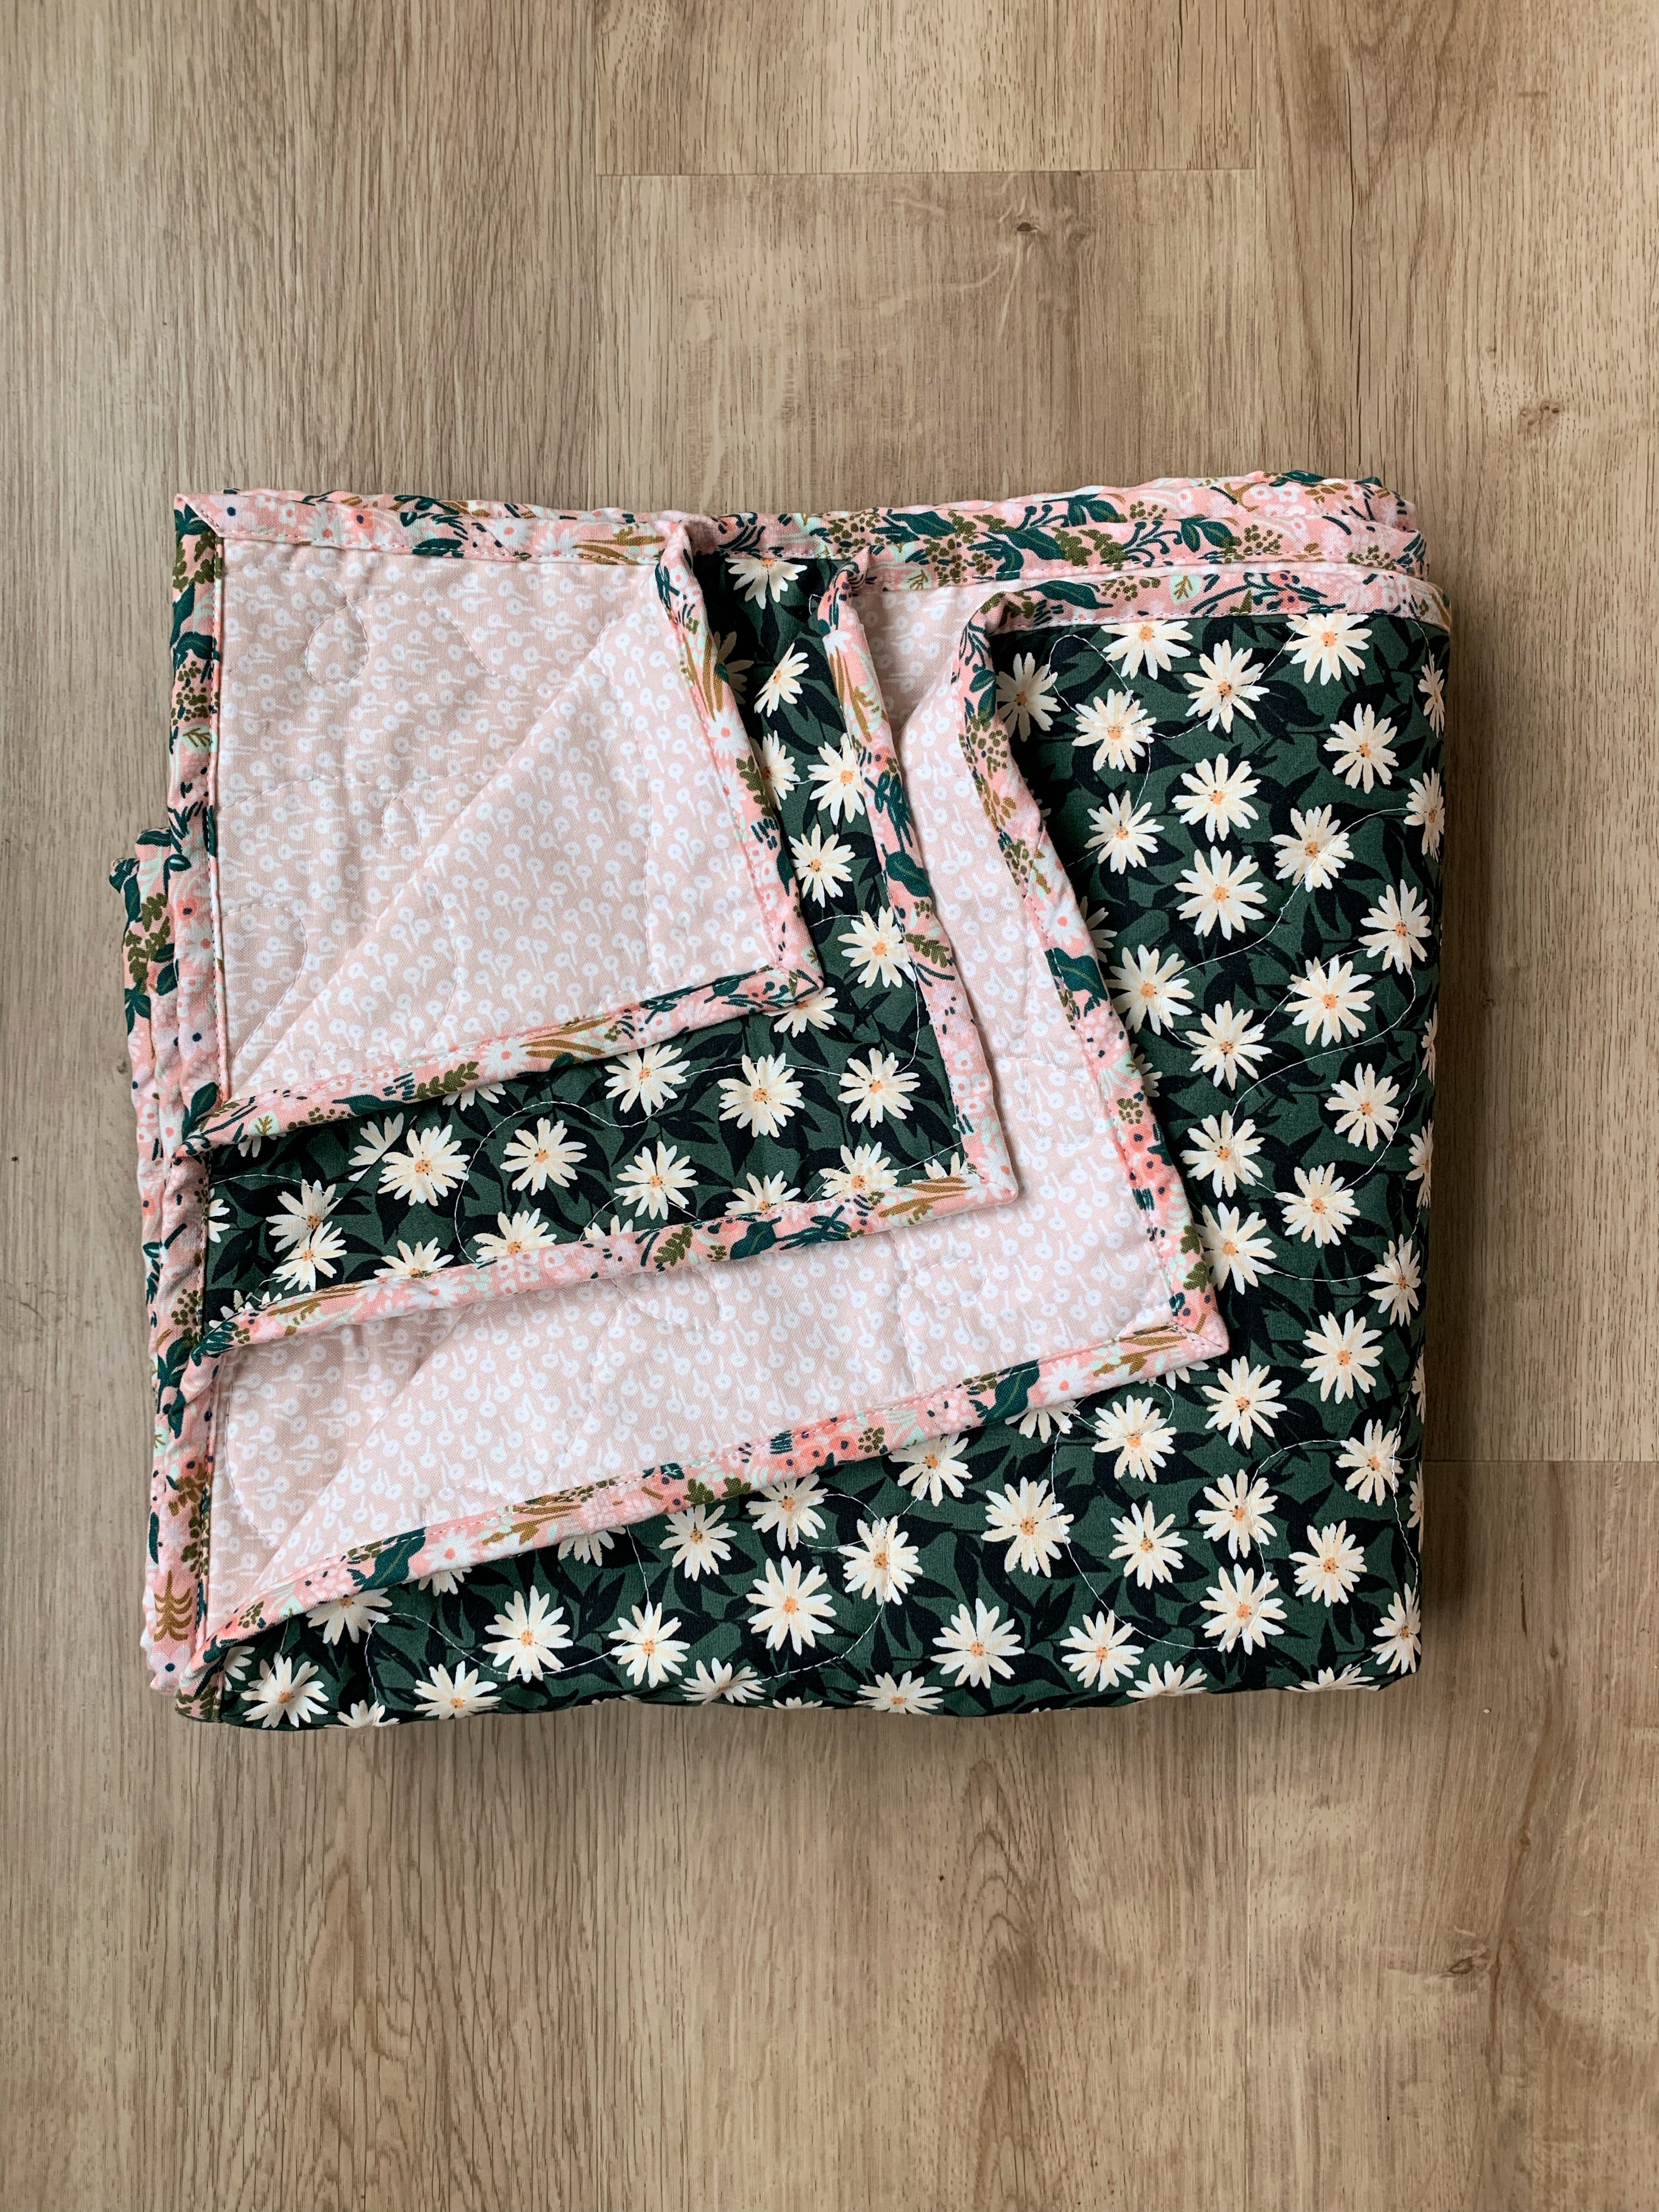 Wholecloth Pressed Flowers Toddler Quilt